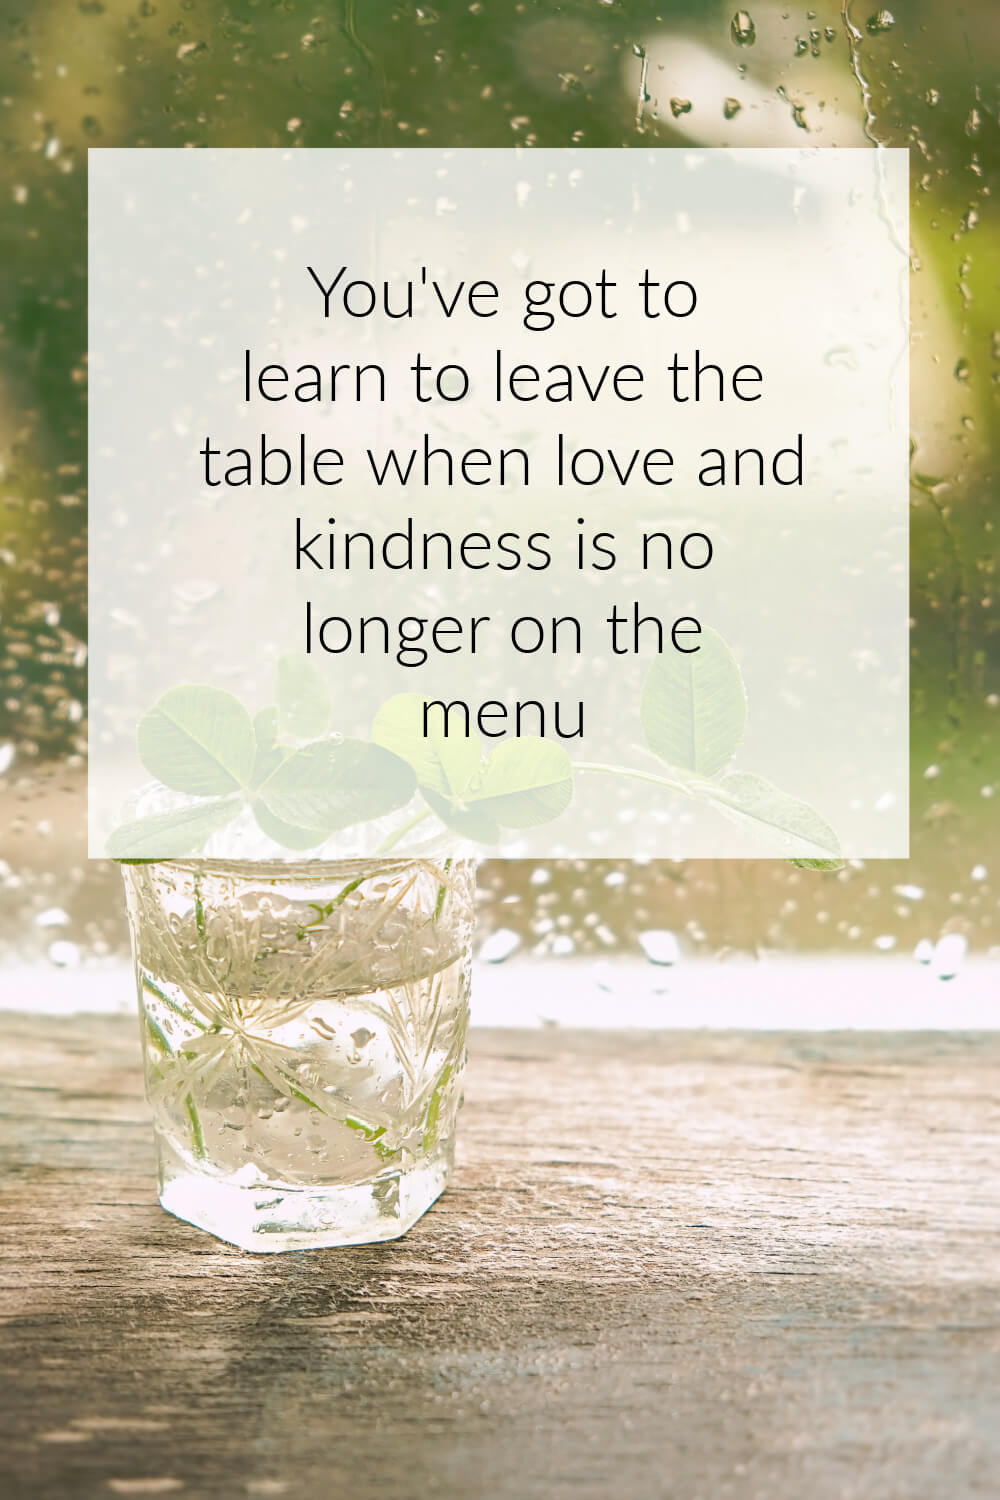 Learn to leave the table